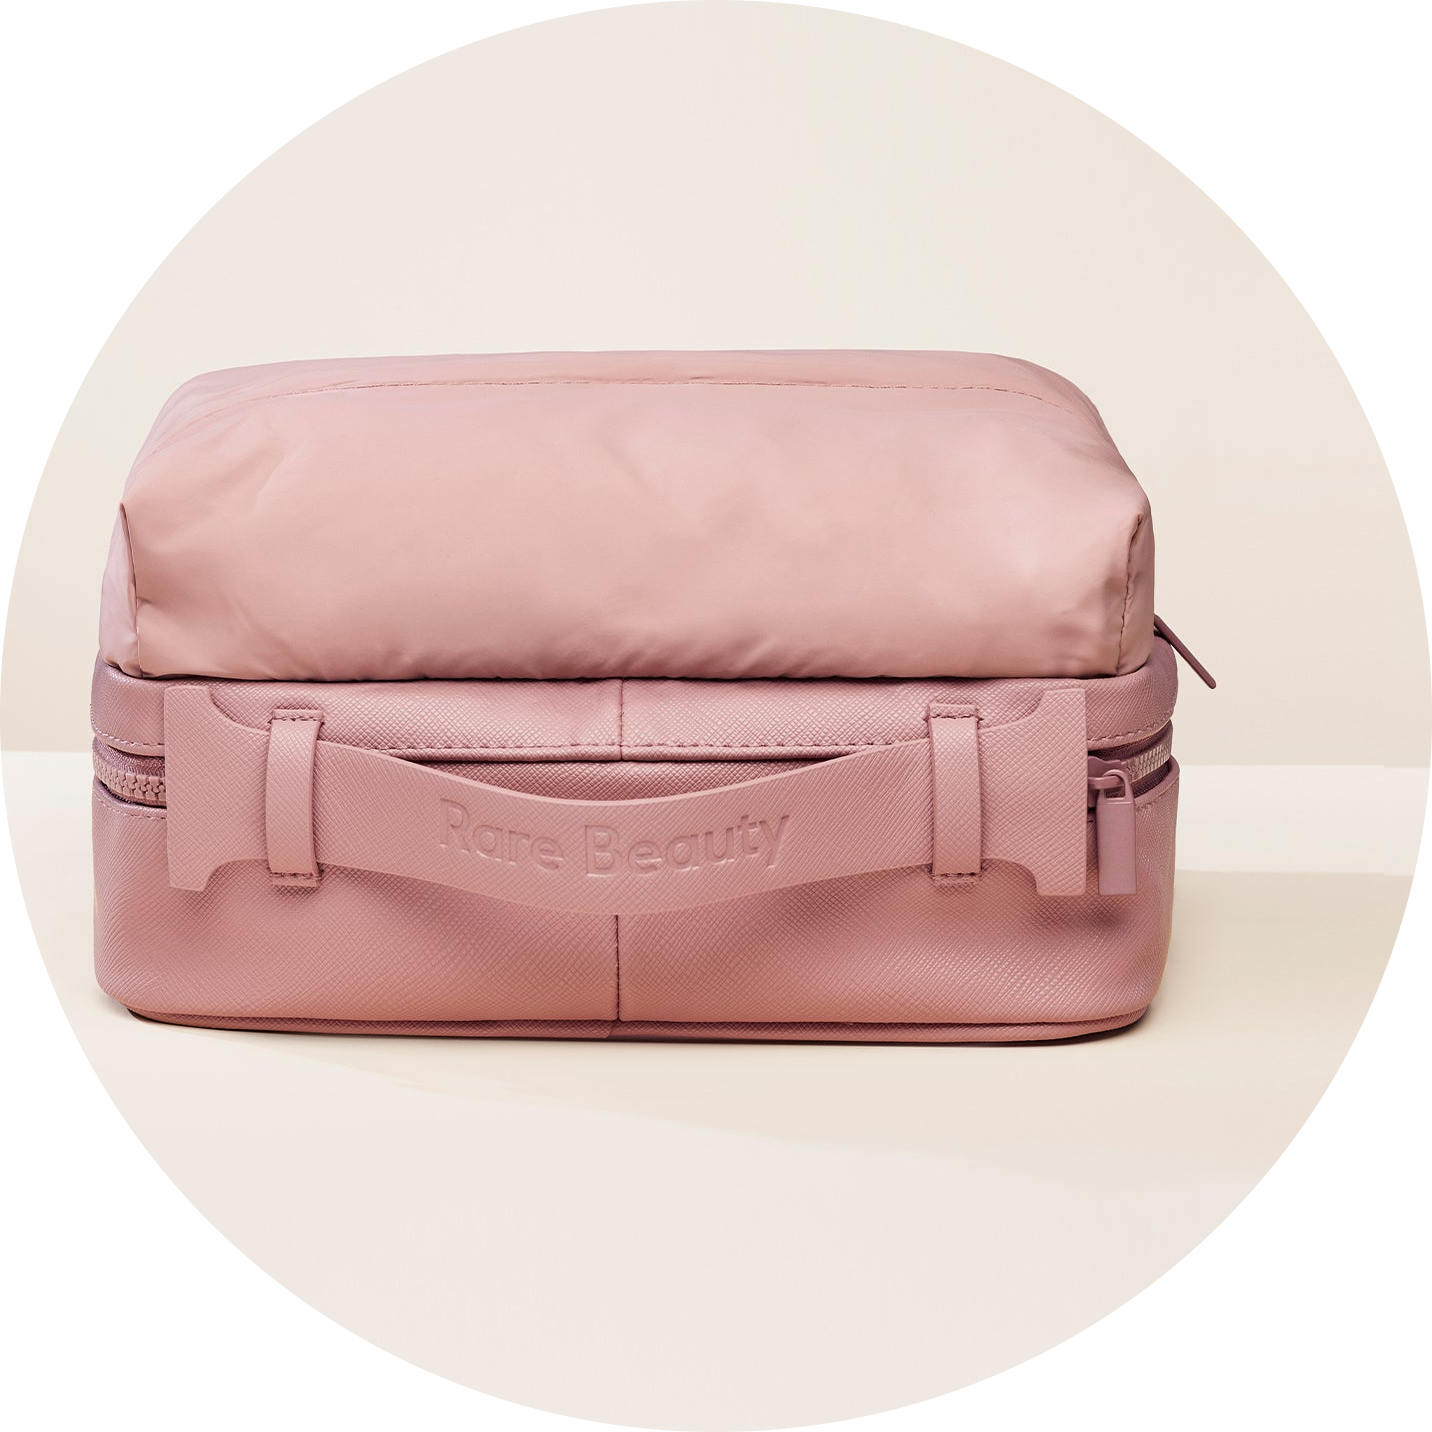 Find Comfort Puffy Toiletry Bag